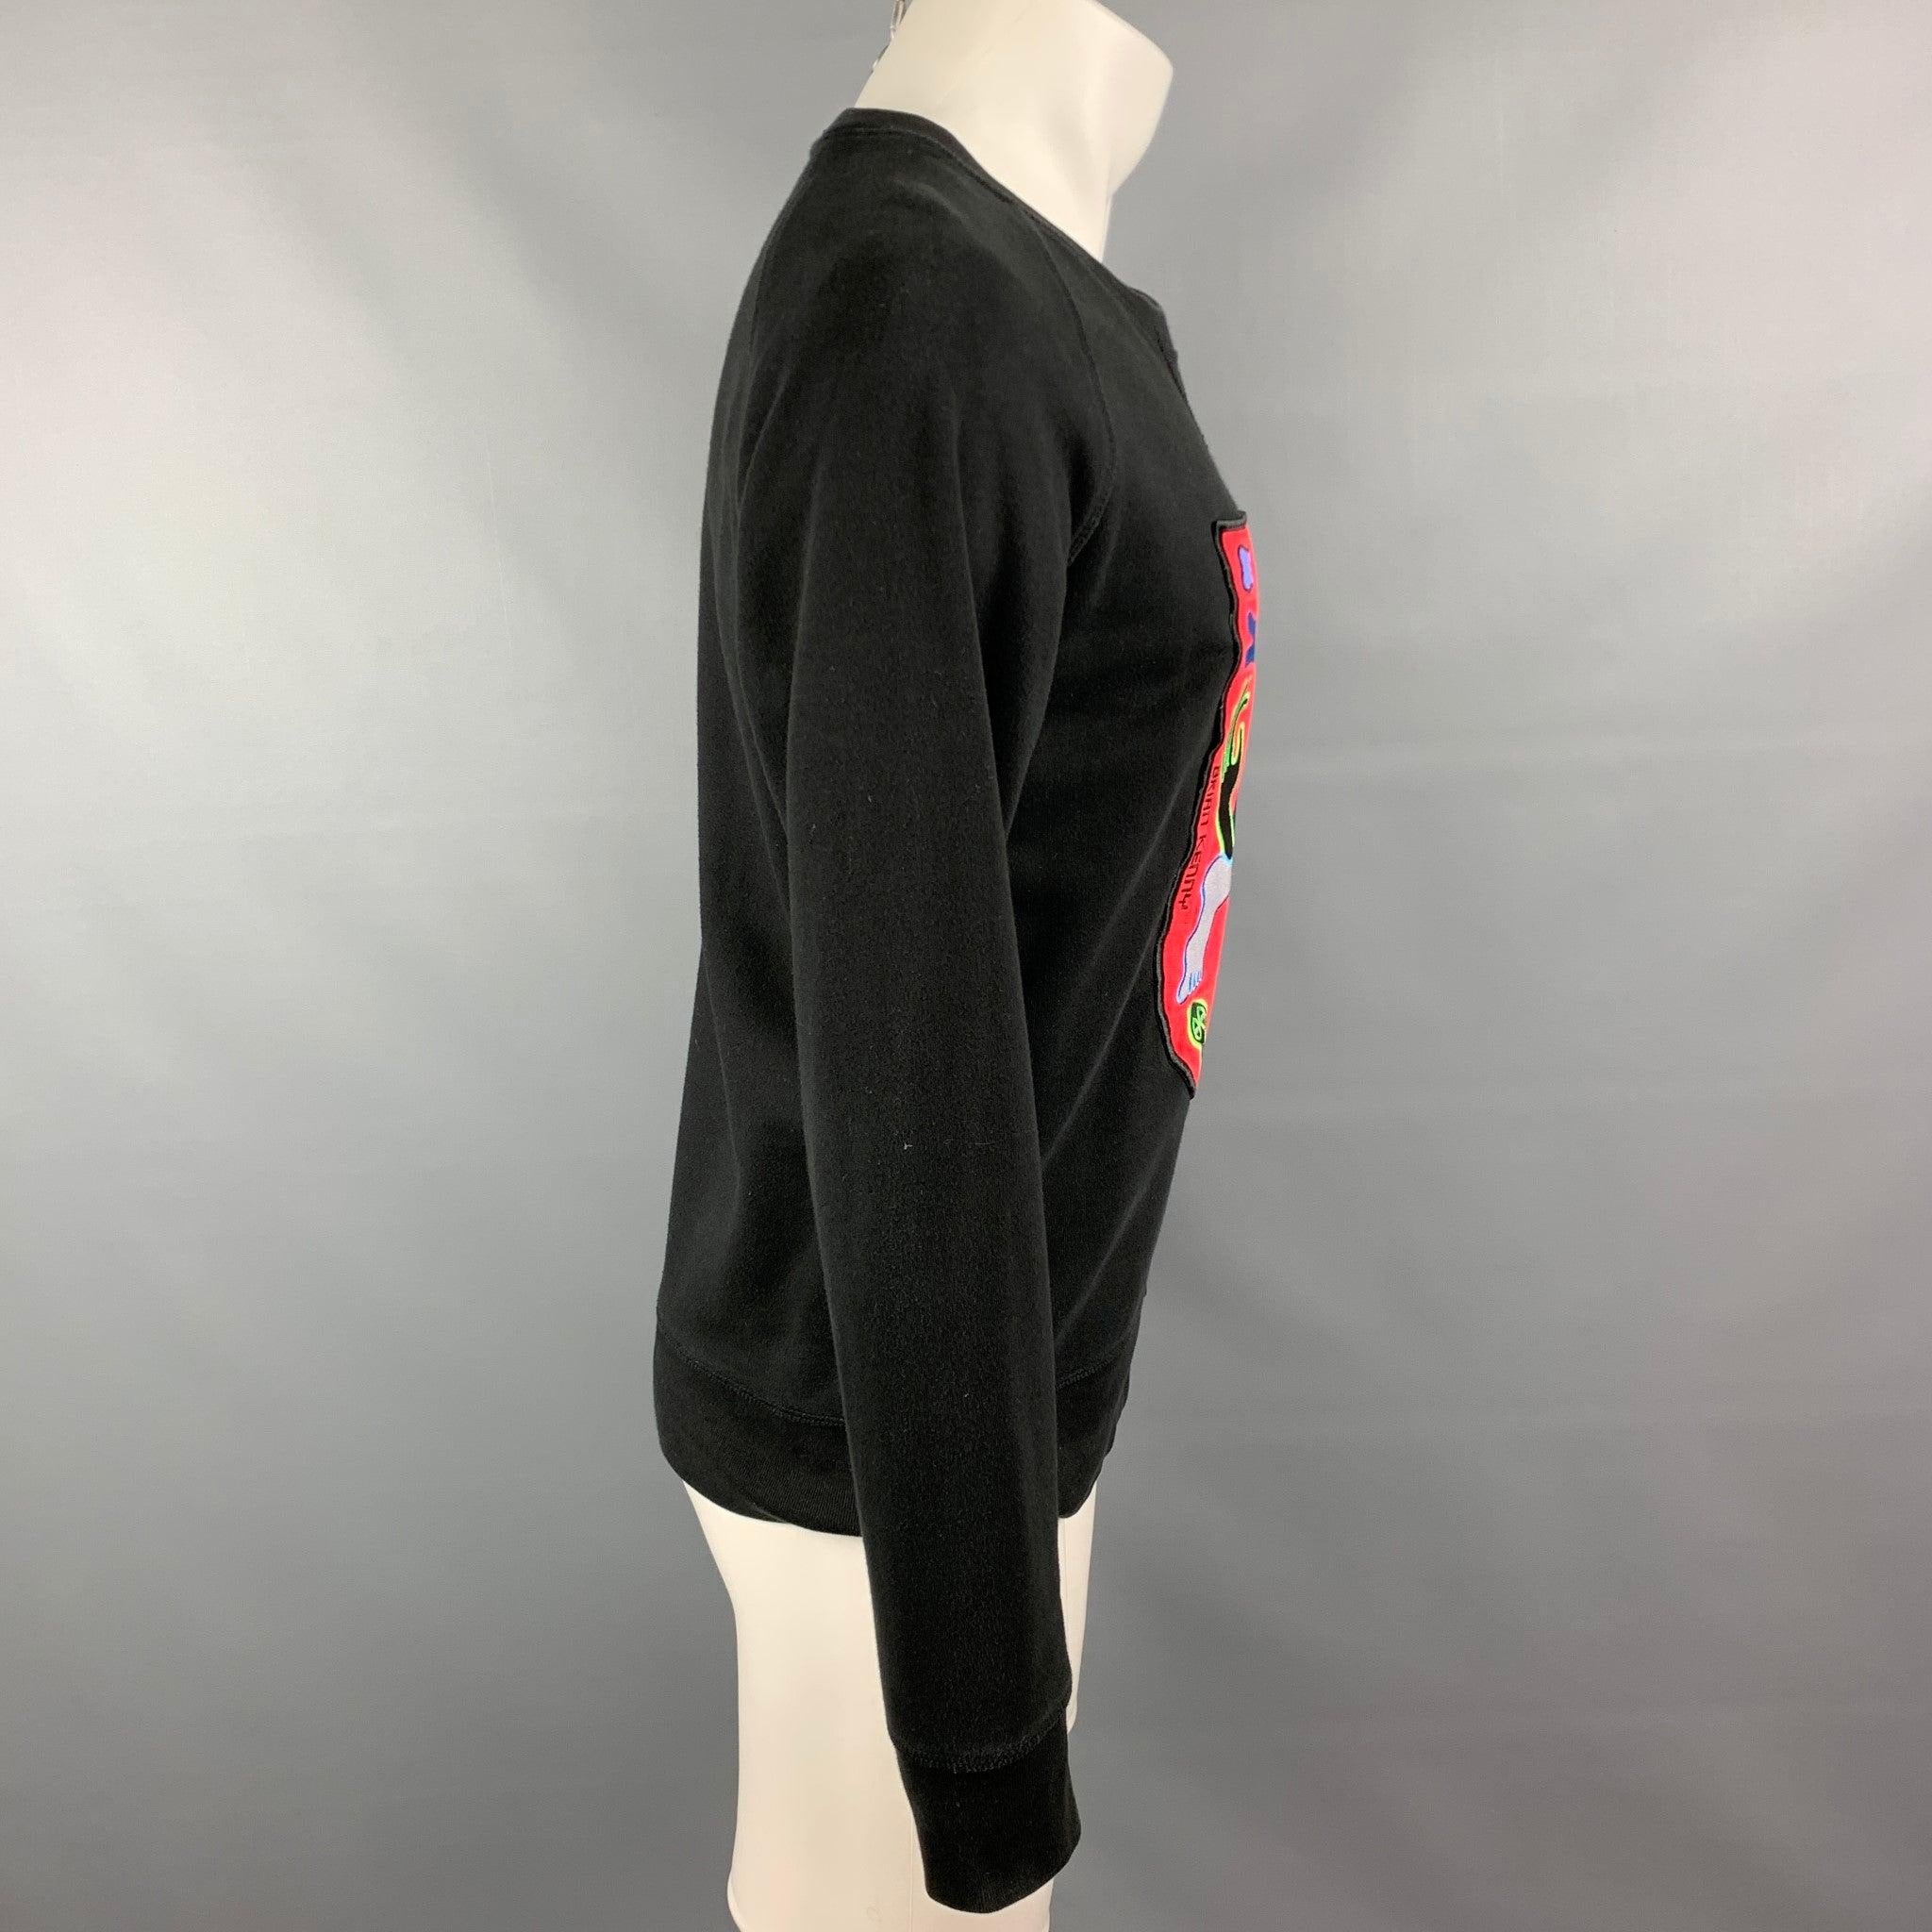 CHRISTIAN LACROIX x BRIAN KENNY Limited Edition Size S Red Cotton Sweatshirt In Good Condition For Sale In San Francisco, CA